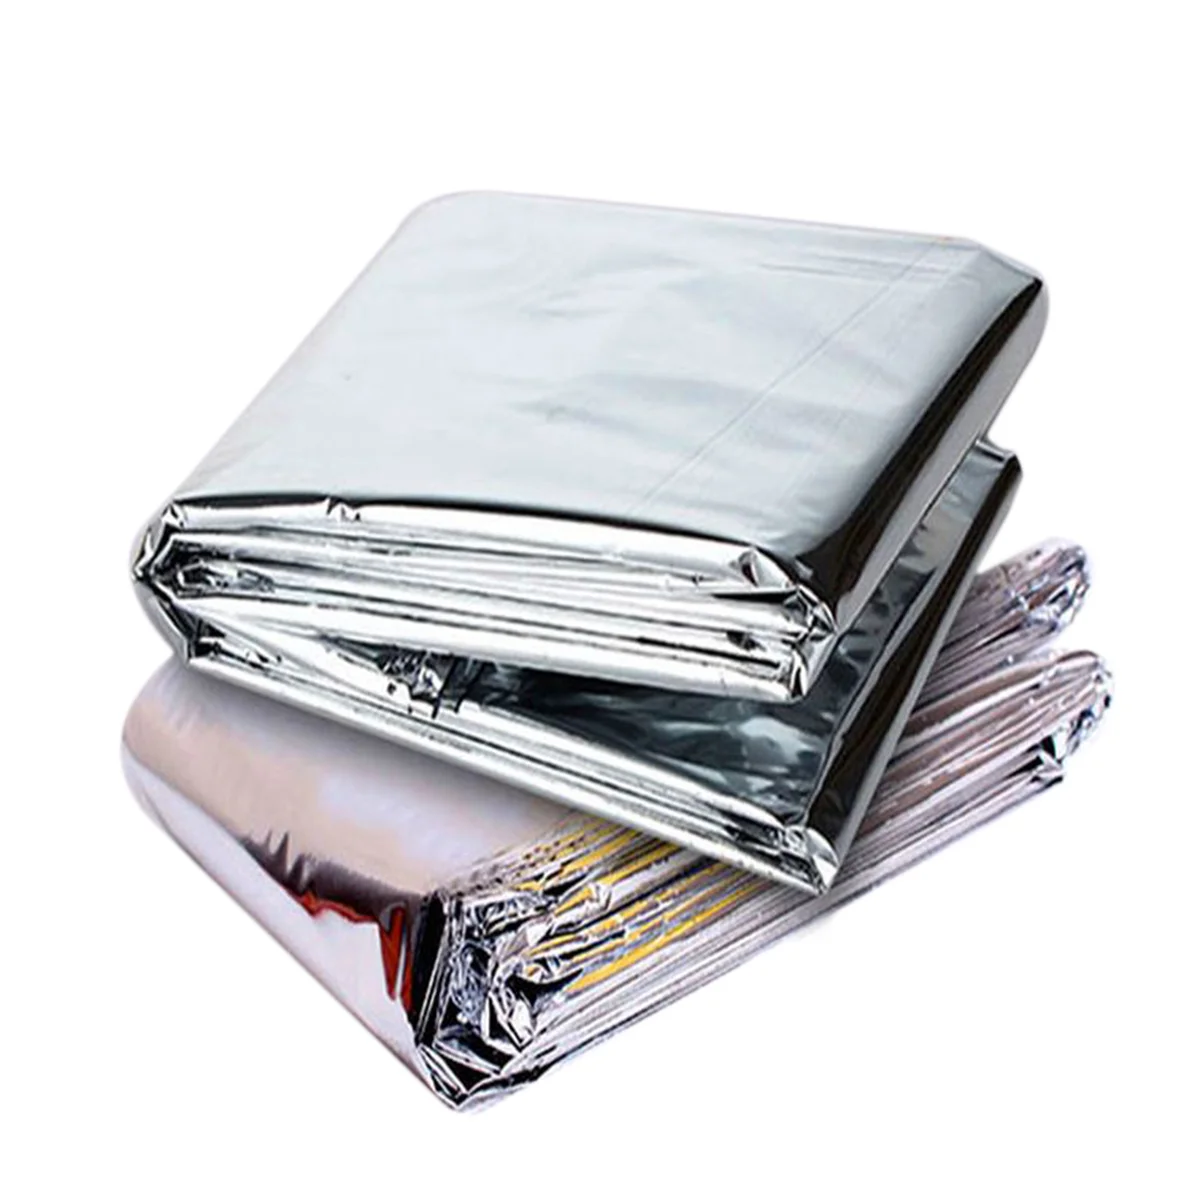 

2pcs 210*130cm Outdoor Survival Emergency Warm Blanket Foldable Waterproof Heat Reflective Mylar Film Thermal Blanket for First